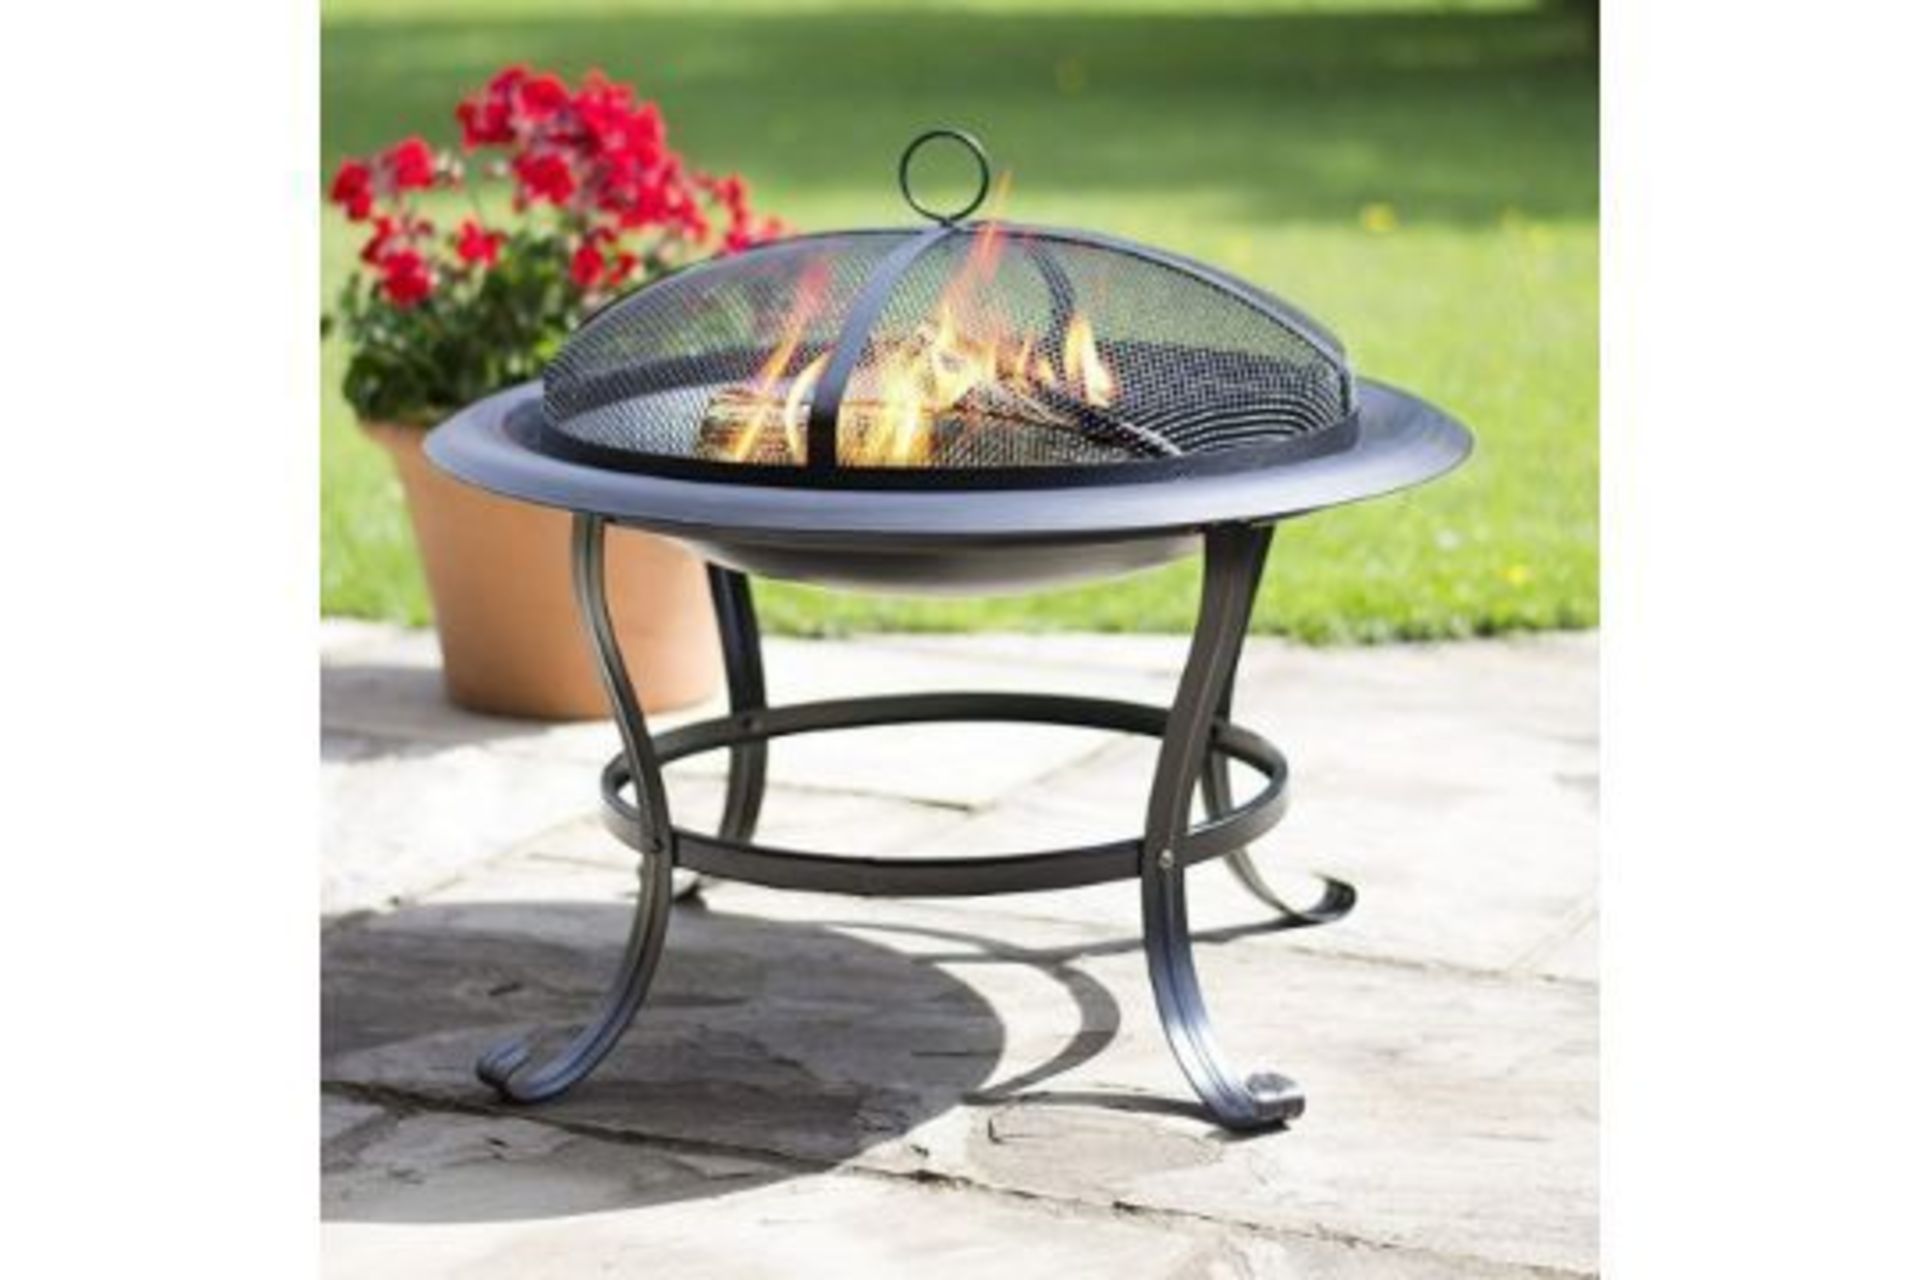 New Boxed STEEL FIRE PIT BOWL WITH MESH LID COOKING GRILL. This stylish steel fire pit bowl comes